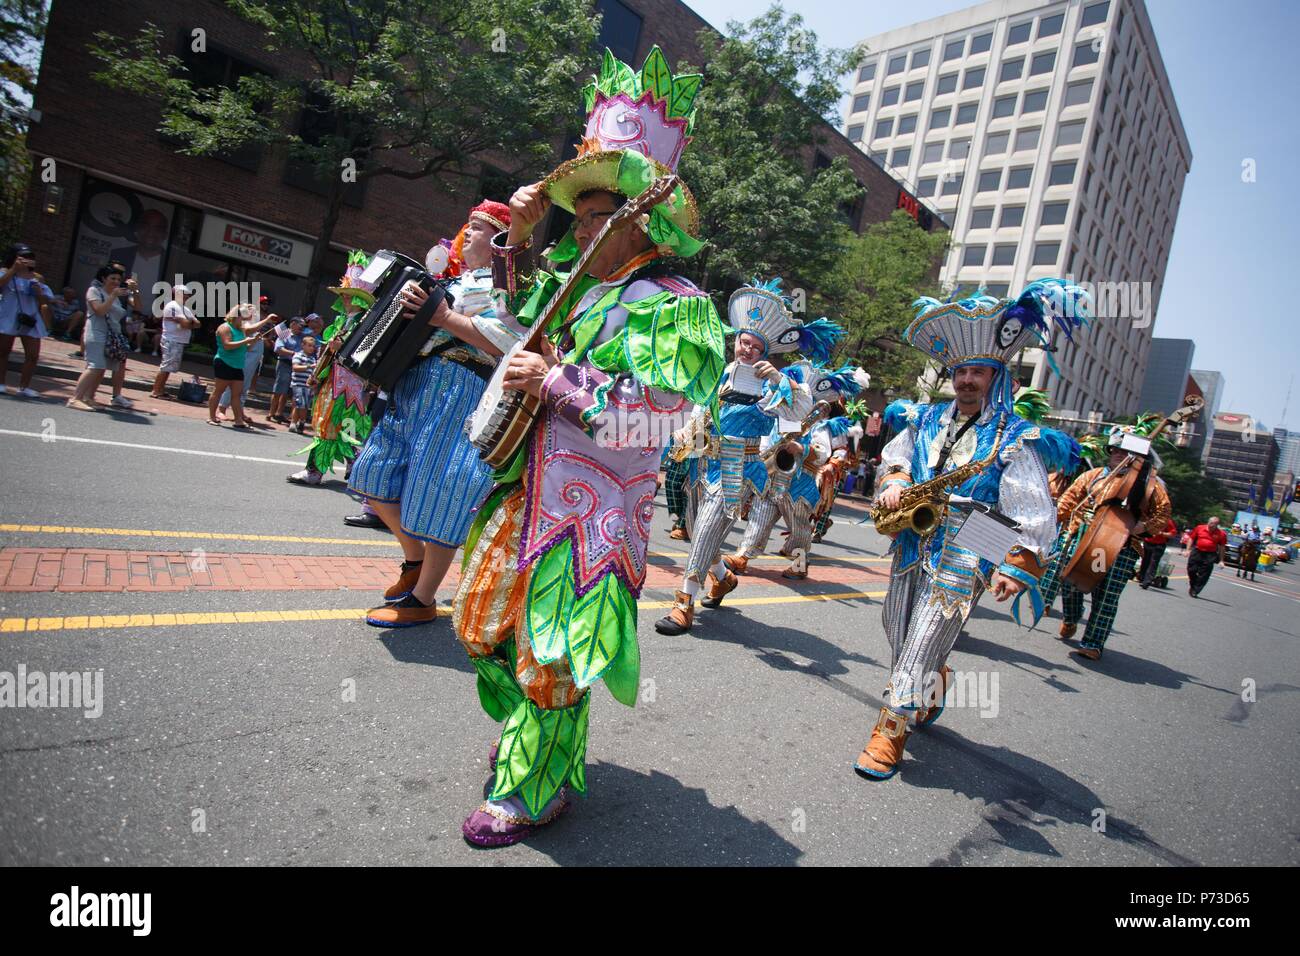 Philadelphia, PA, USA. 4th July, 2018. Members of the Ferko String Band participate in the Independence Day Parade through the city's historic district. Credit: Michael Candelori/ZUMA Wire/Alamy Live News Stock Photo